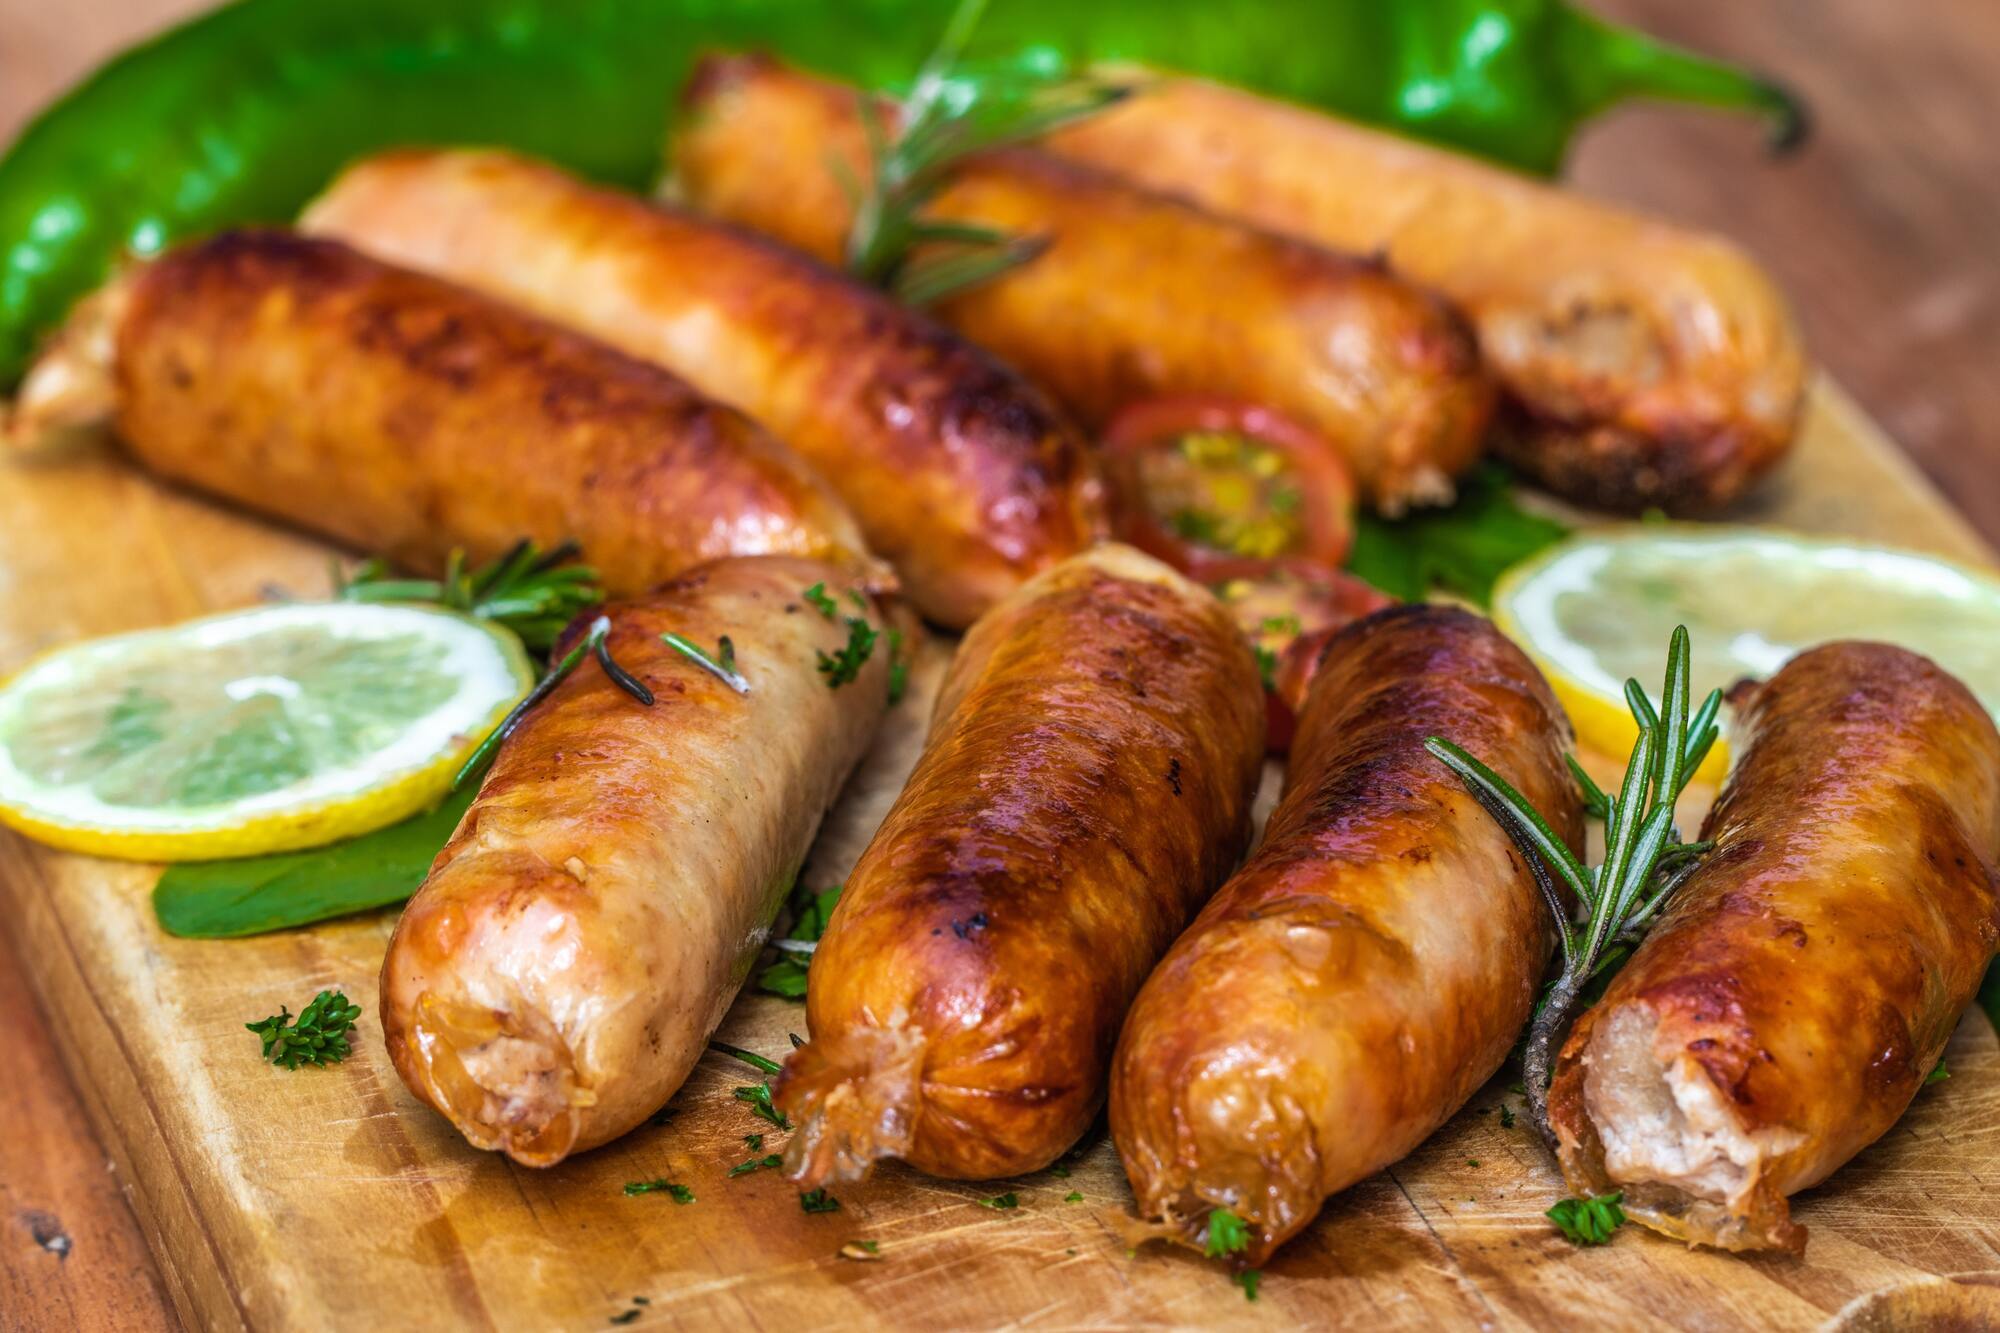 How to choose quality sausages in the store: pay special attention to these signs